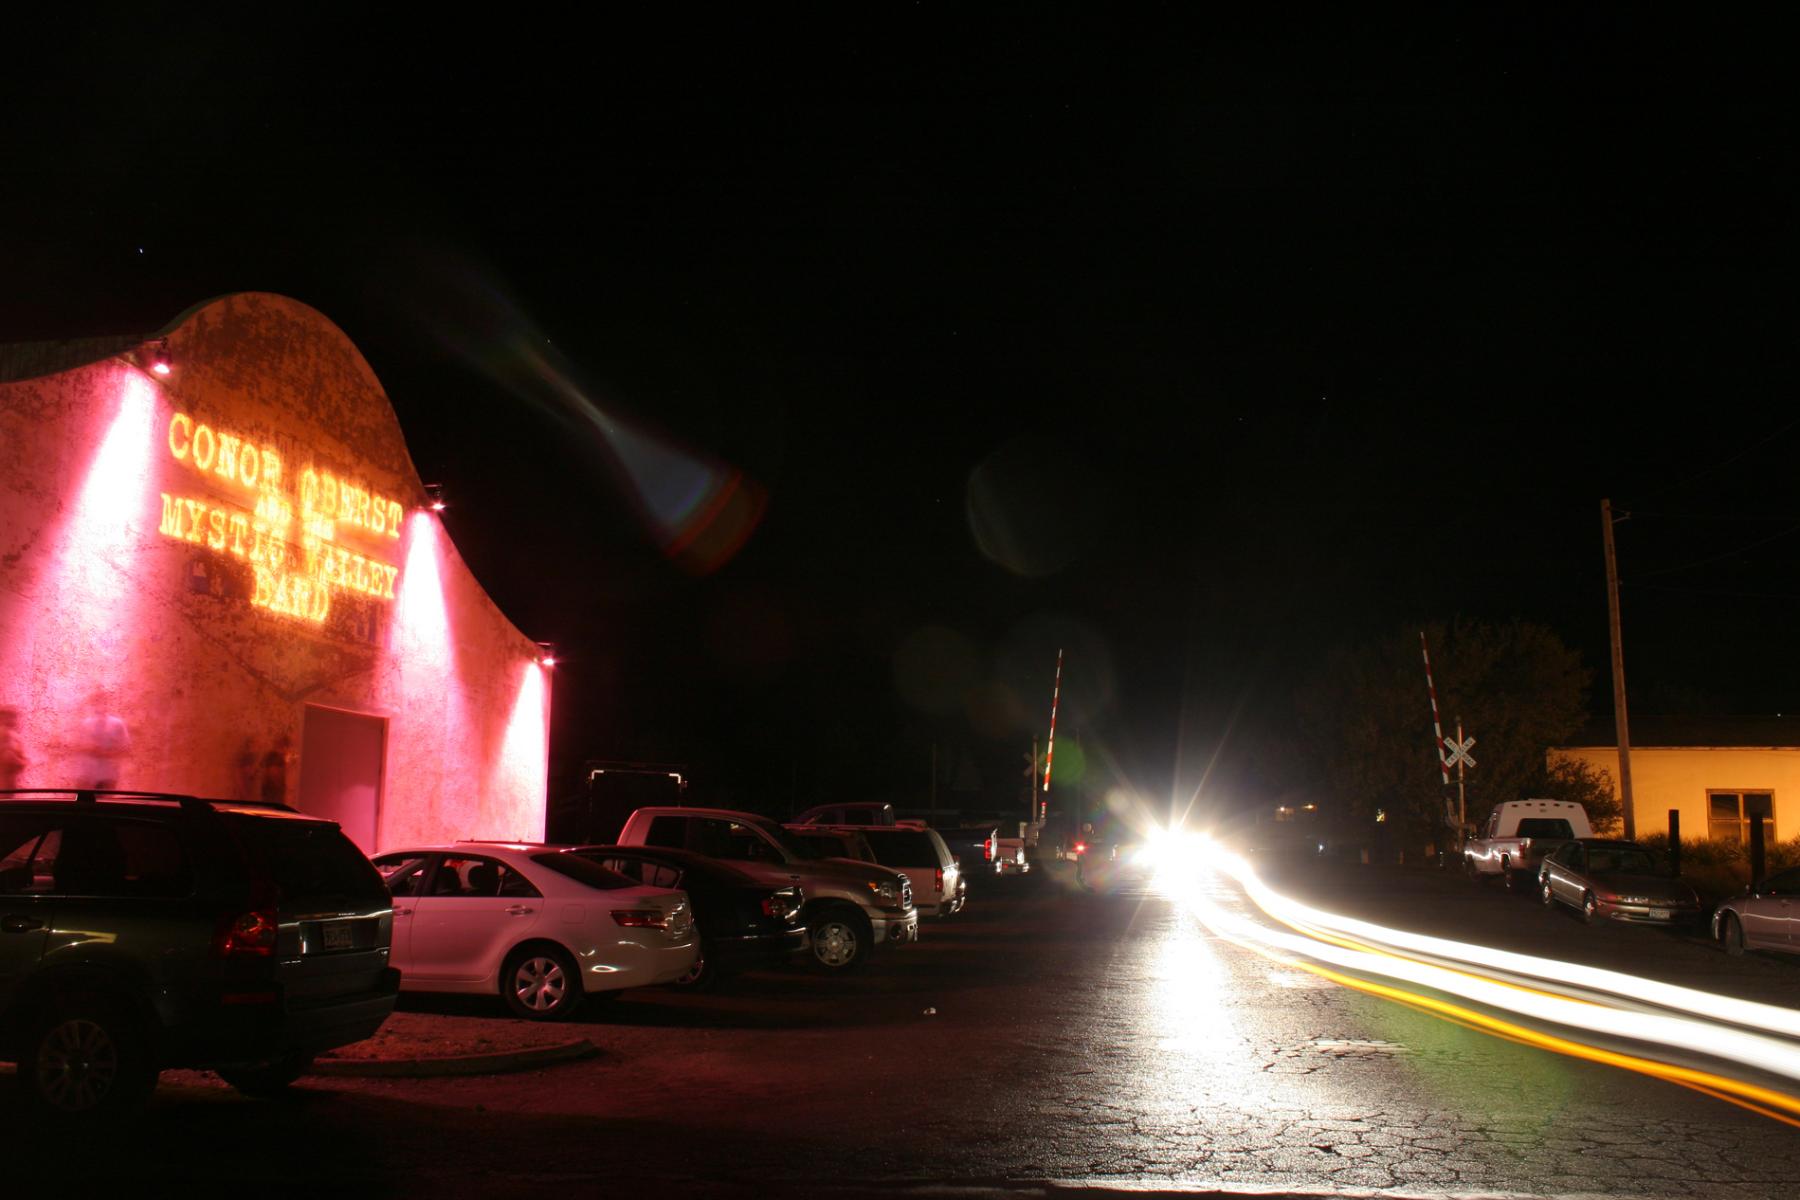 Crowley Theater